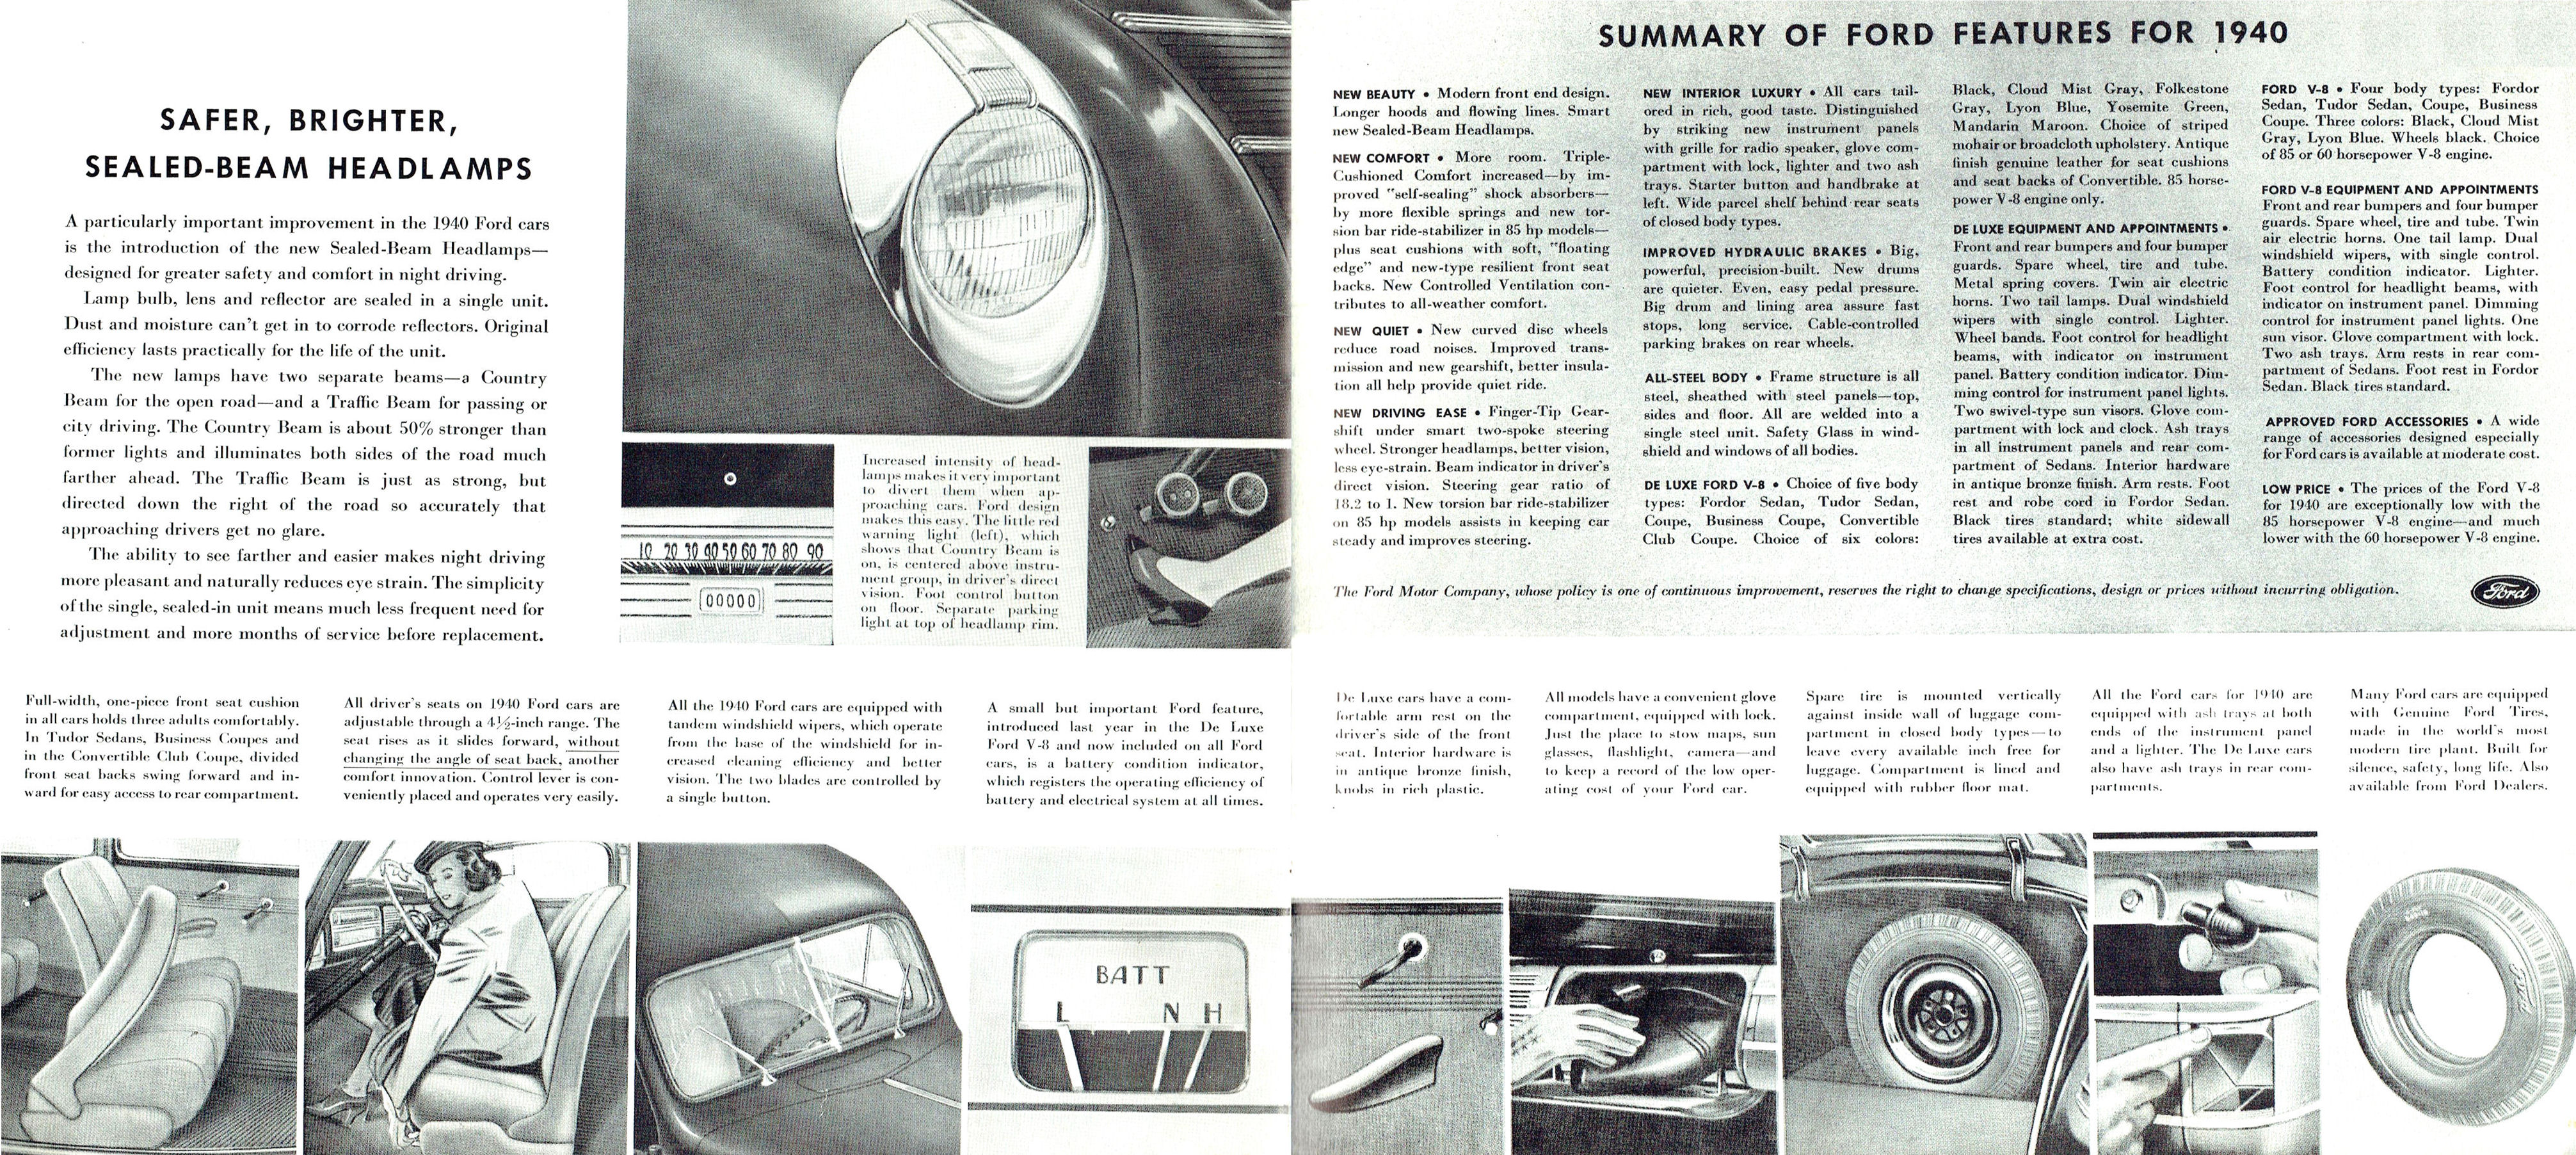 1940_Ford_BW-14-15